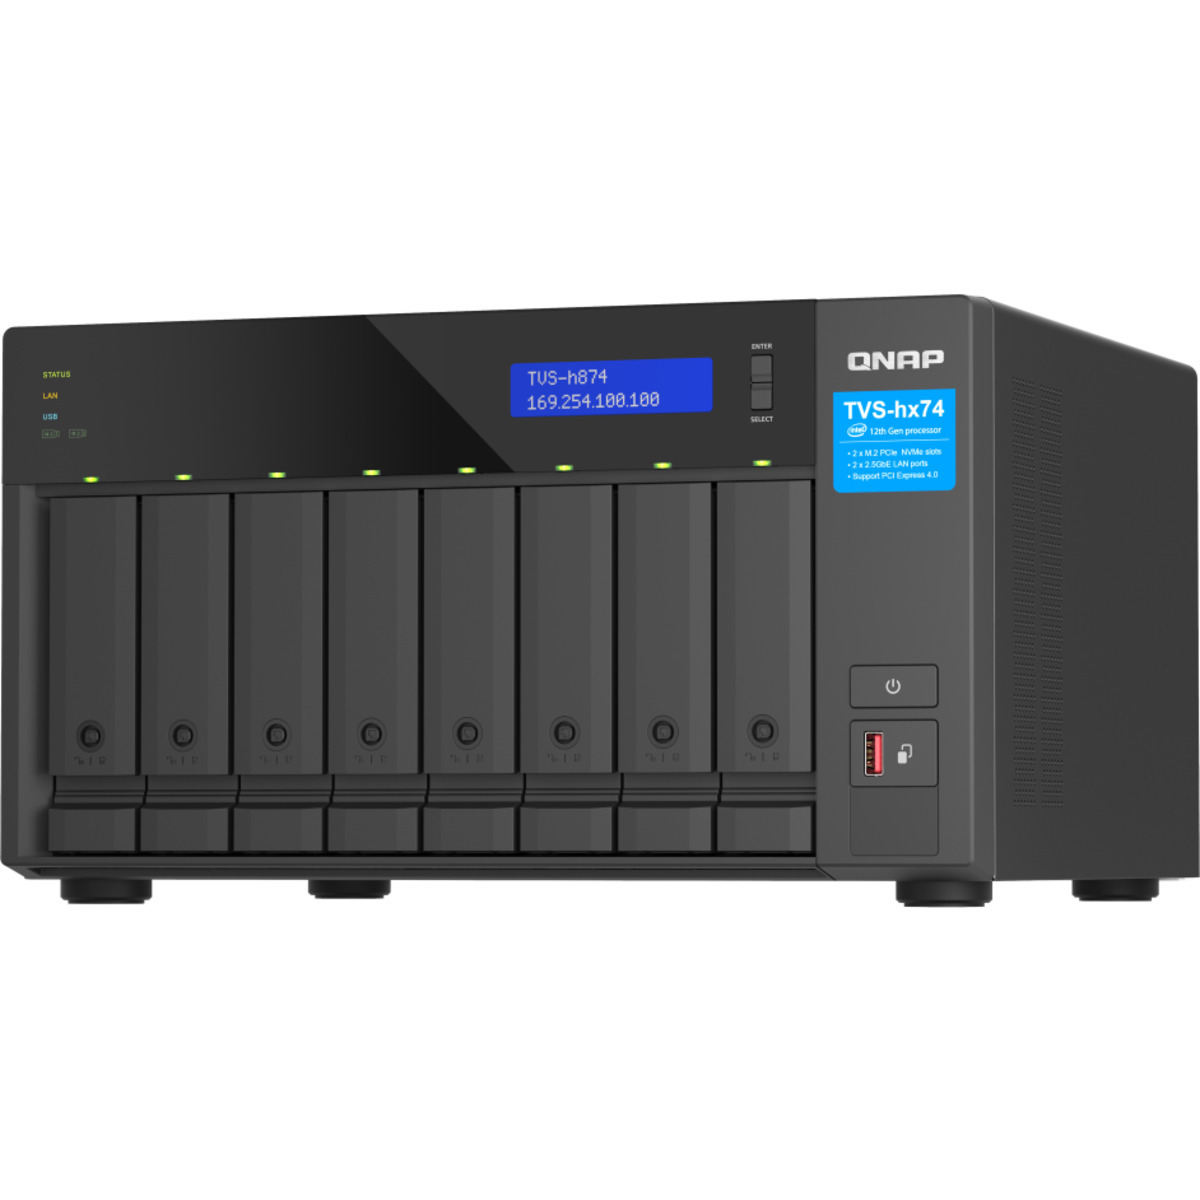 QNAP TVS-h874 Core i5 36tb 8-Bay Desktop Multimedia / Power User / Business NAS - Network Attached Storage Device 6x6tb Western Digital Ultrastar DC HC310 HUS726T6TALE6L4 3.5 7200rpm SATA 6Gb/s HDD ENTERPRISE Class Drives Installed - Burn-In Tested TVS-h874 Core i5